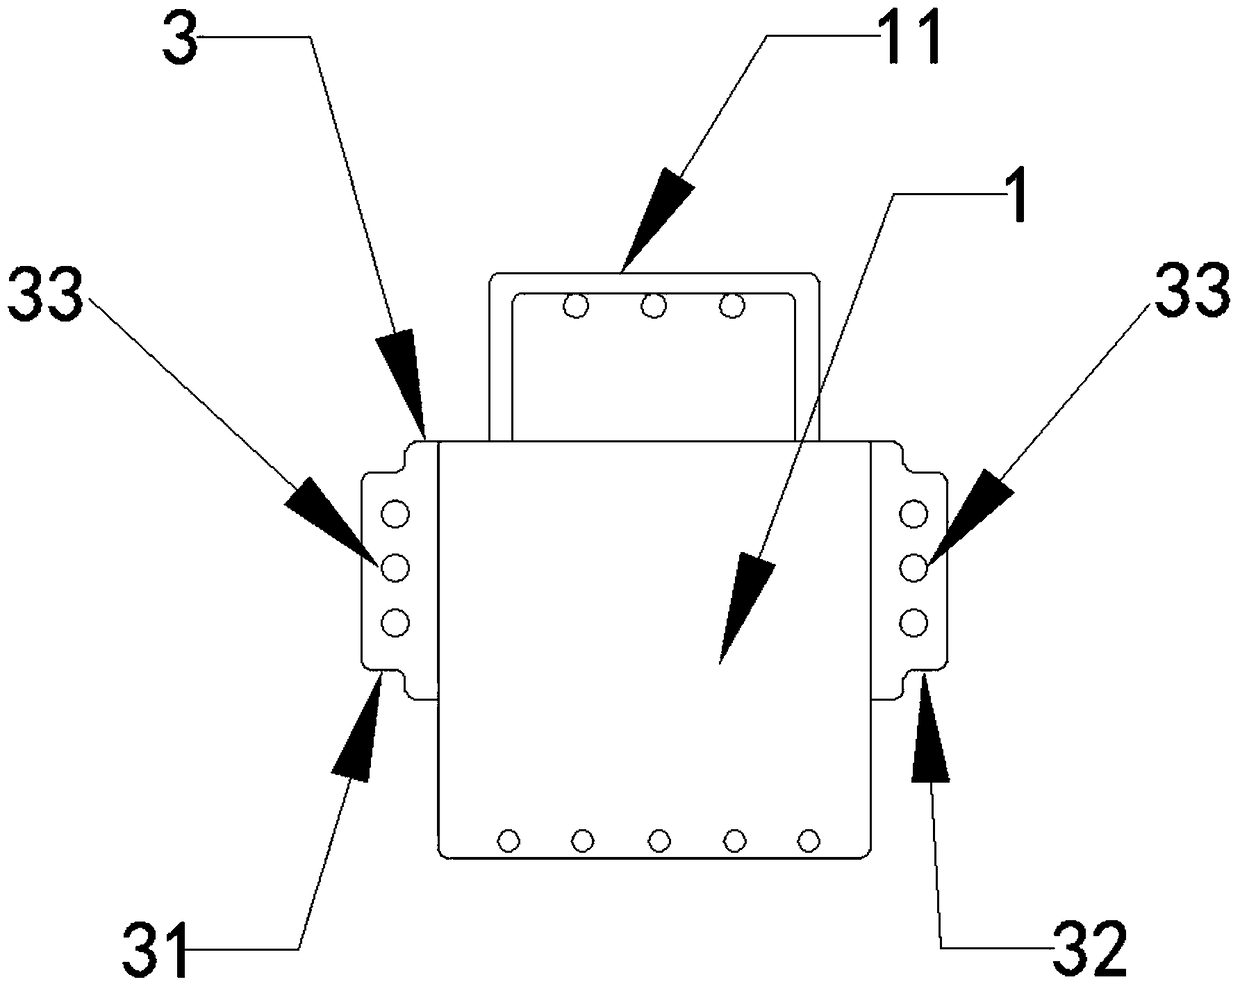 A connection structure of concrete prefabricated beams and steel beams